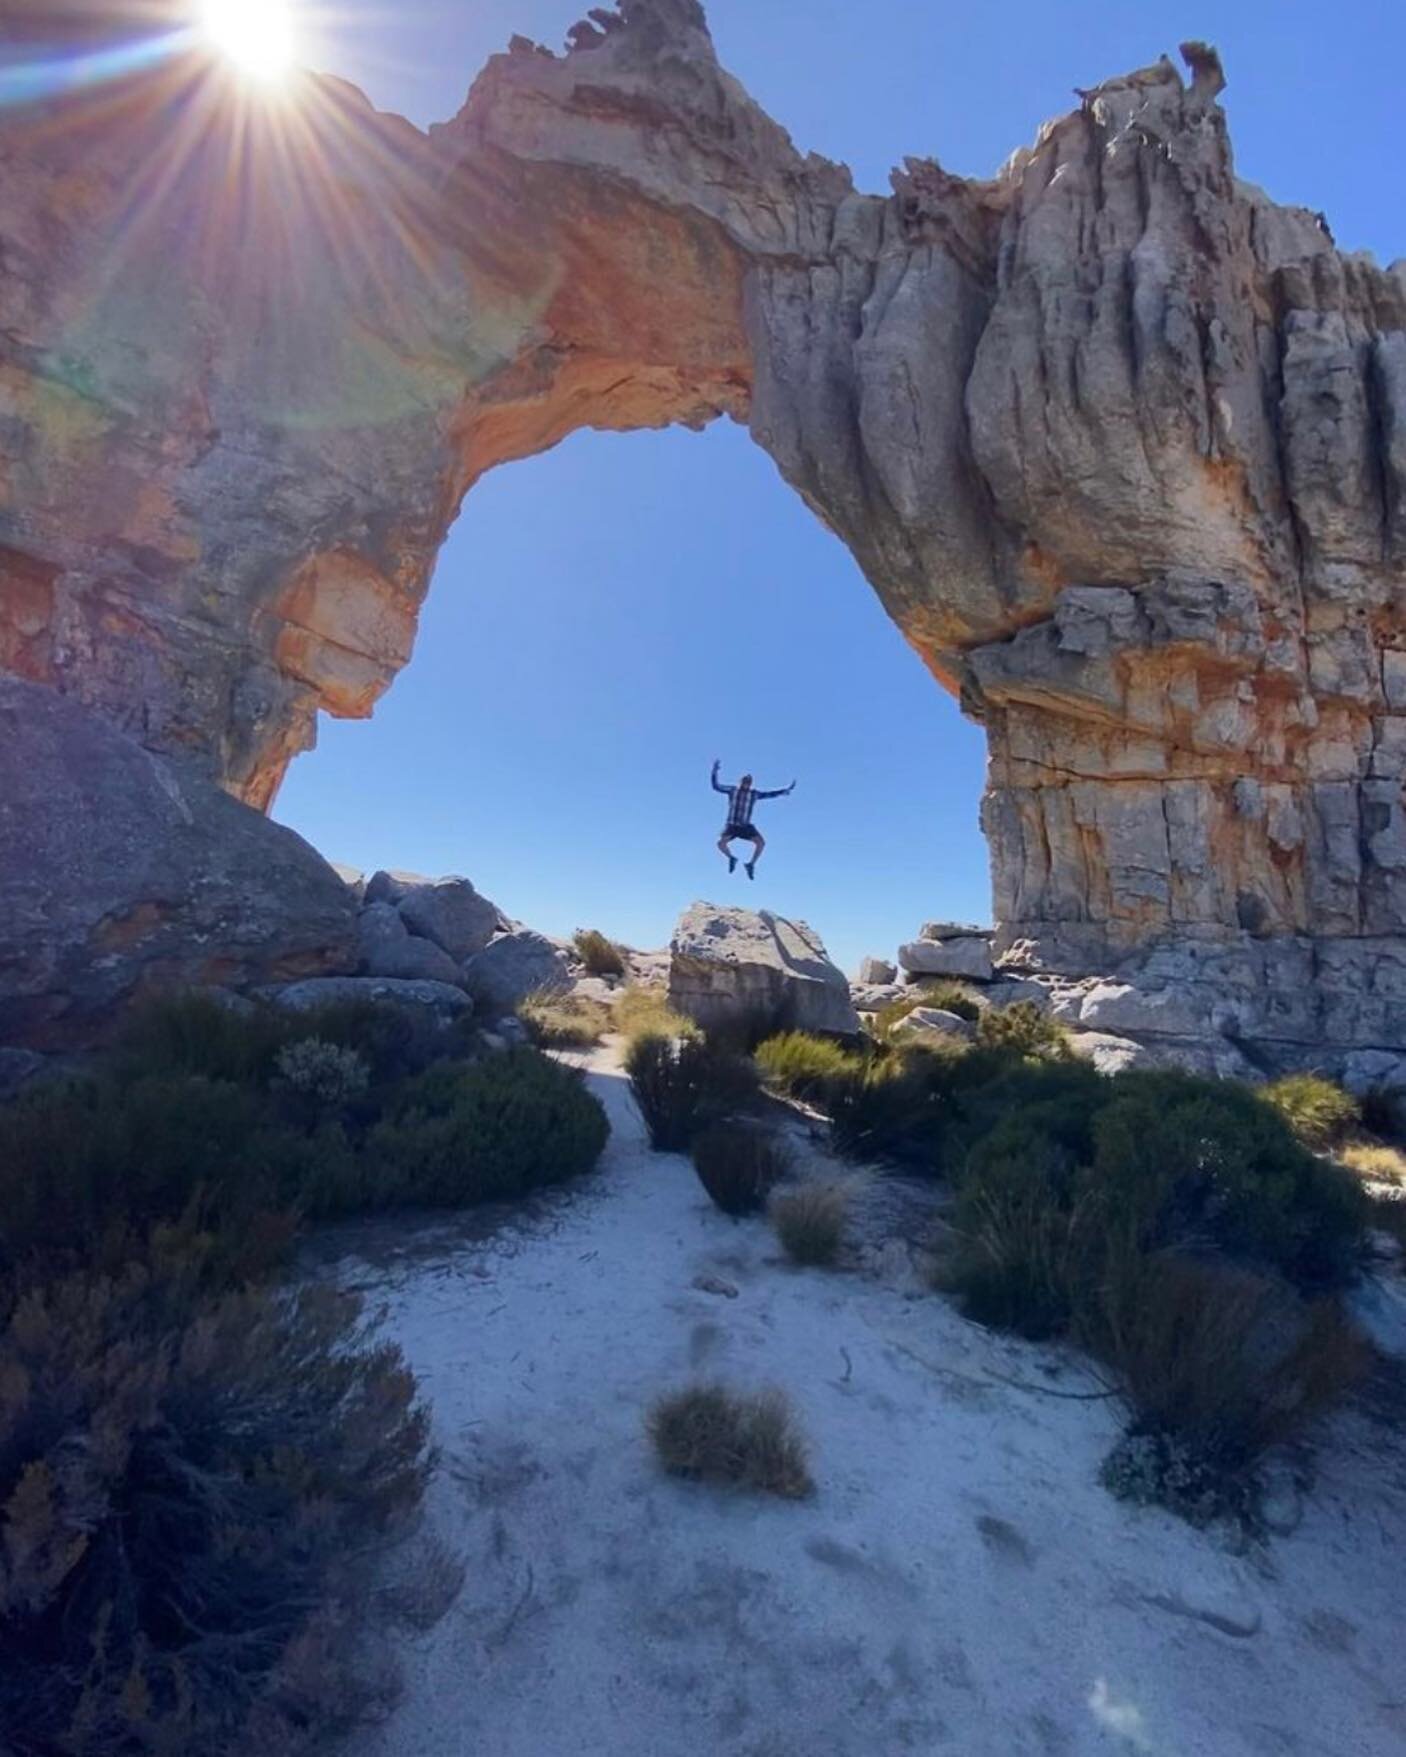 In the Cederberg you get to escape the hustle and bustle of everyday life. With its stunning scenery, unique flora and fauna, and invigorating fresh air, the Cederberg and all it has to offer is a fantastic way to recharge and rejuvenate. We can't wa